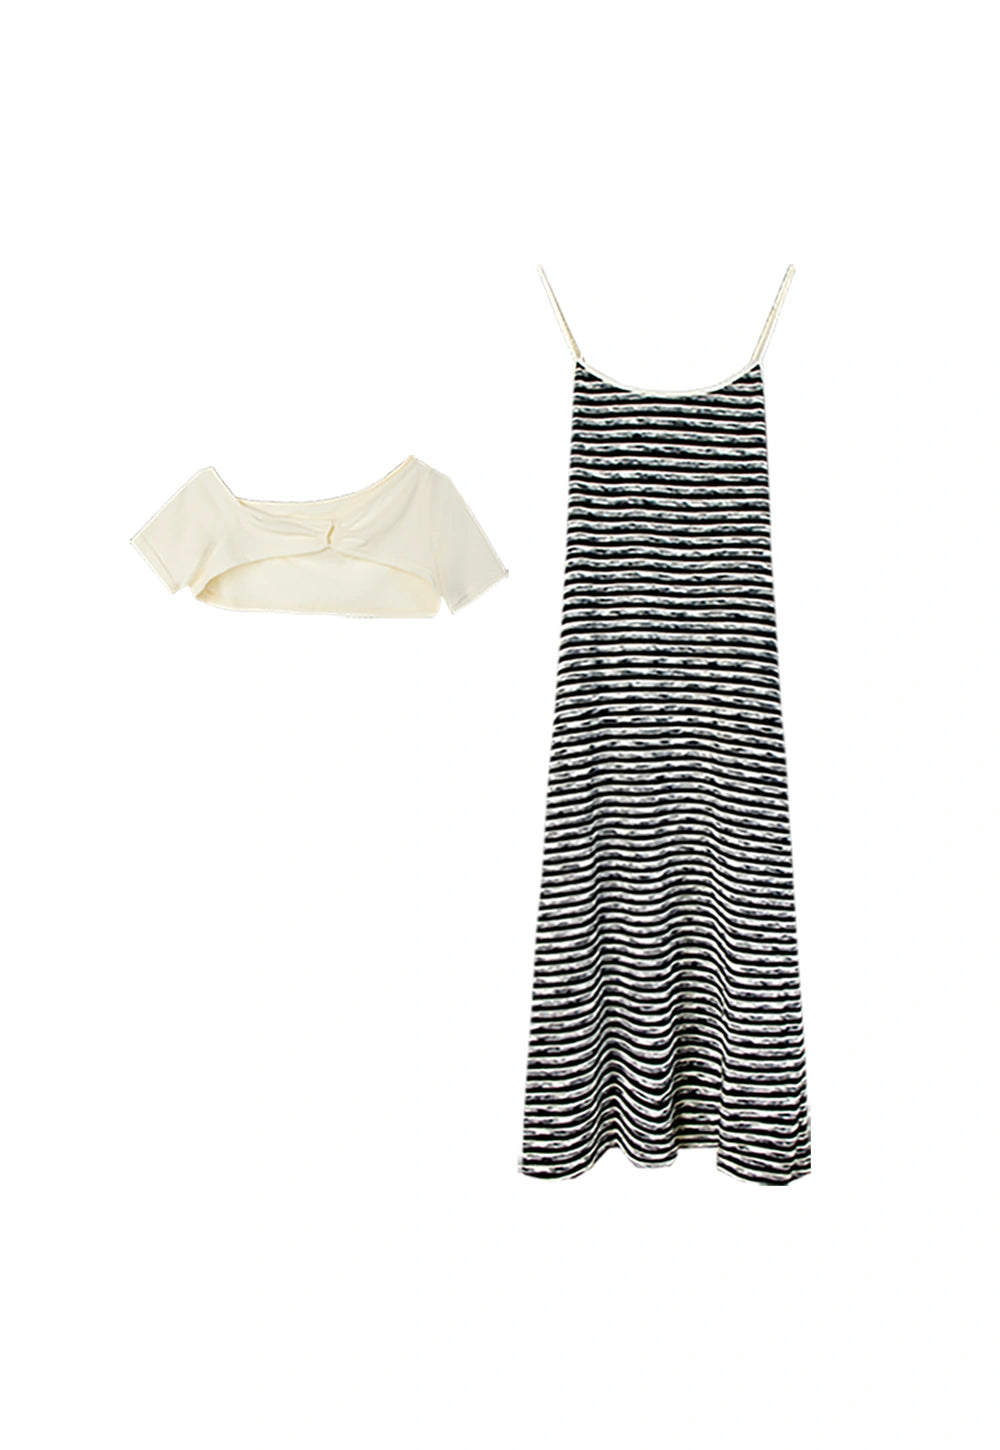 Women's Two-Piece Outfit: Off-White Crop Top and Black & White Maxi Dress